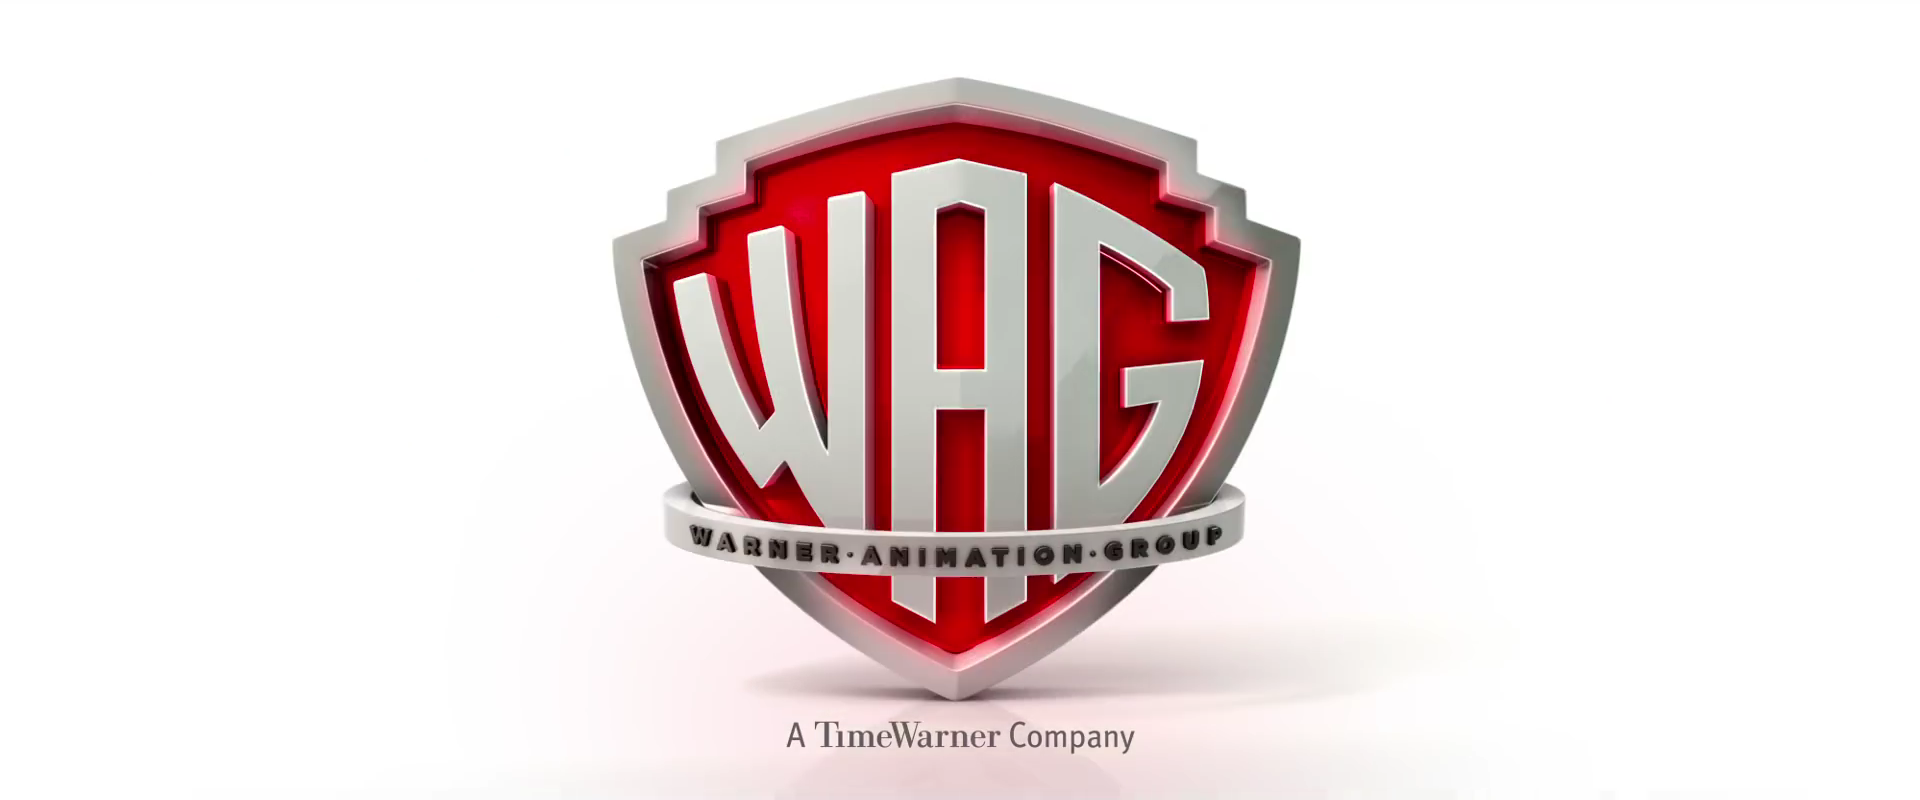 Image   Warner Animation Group Logo 2016.png | Logopedia | Fandom Powered By Wikia - Wag, Transparent background PNG HD thumbnail